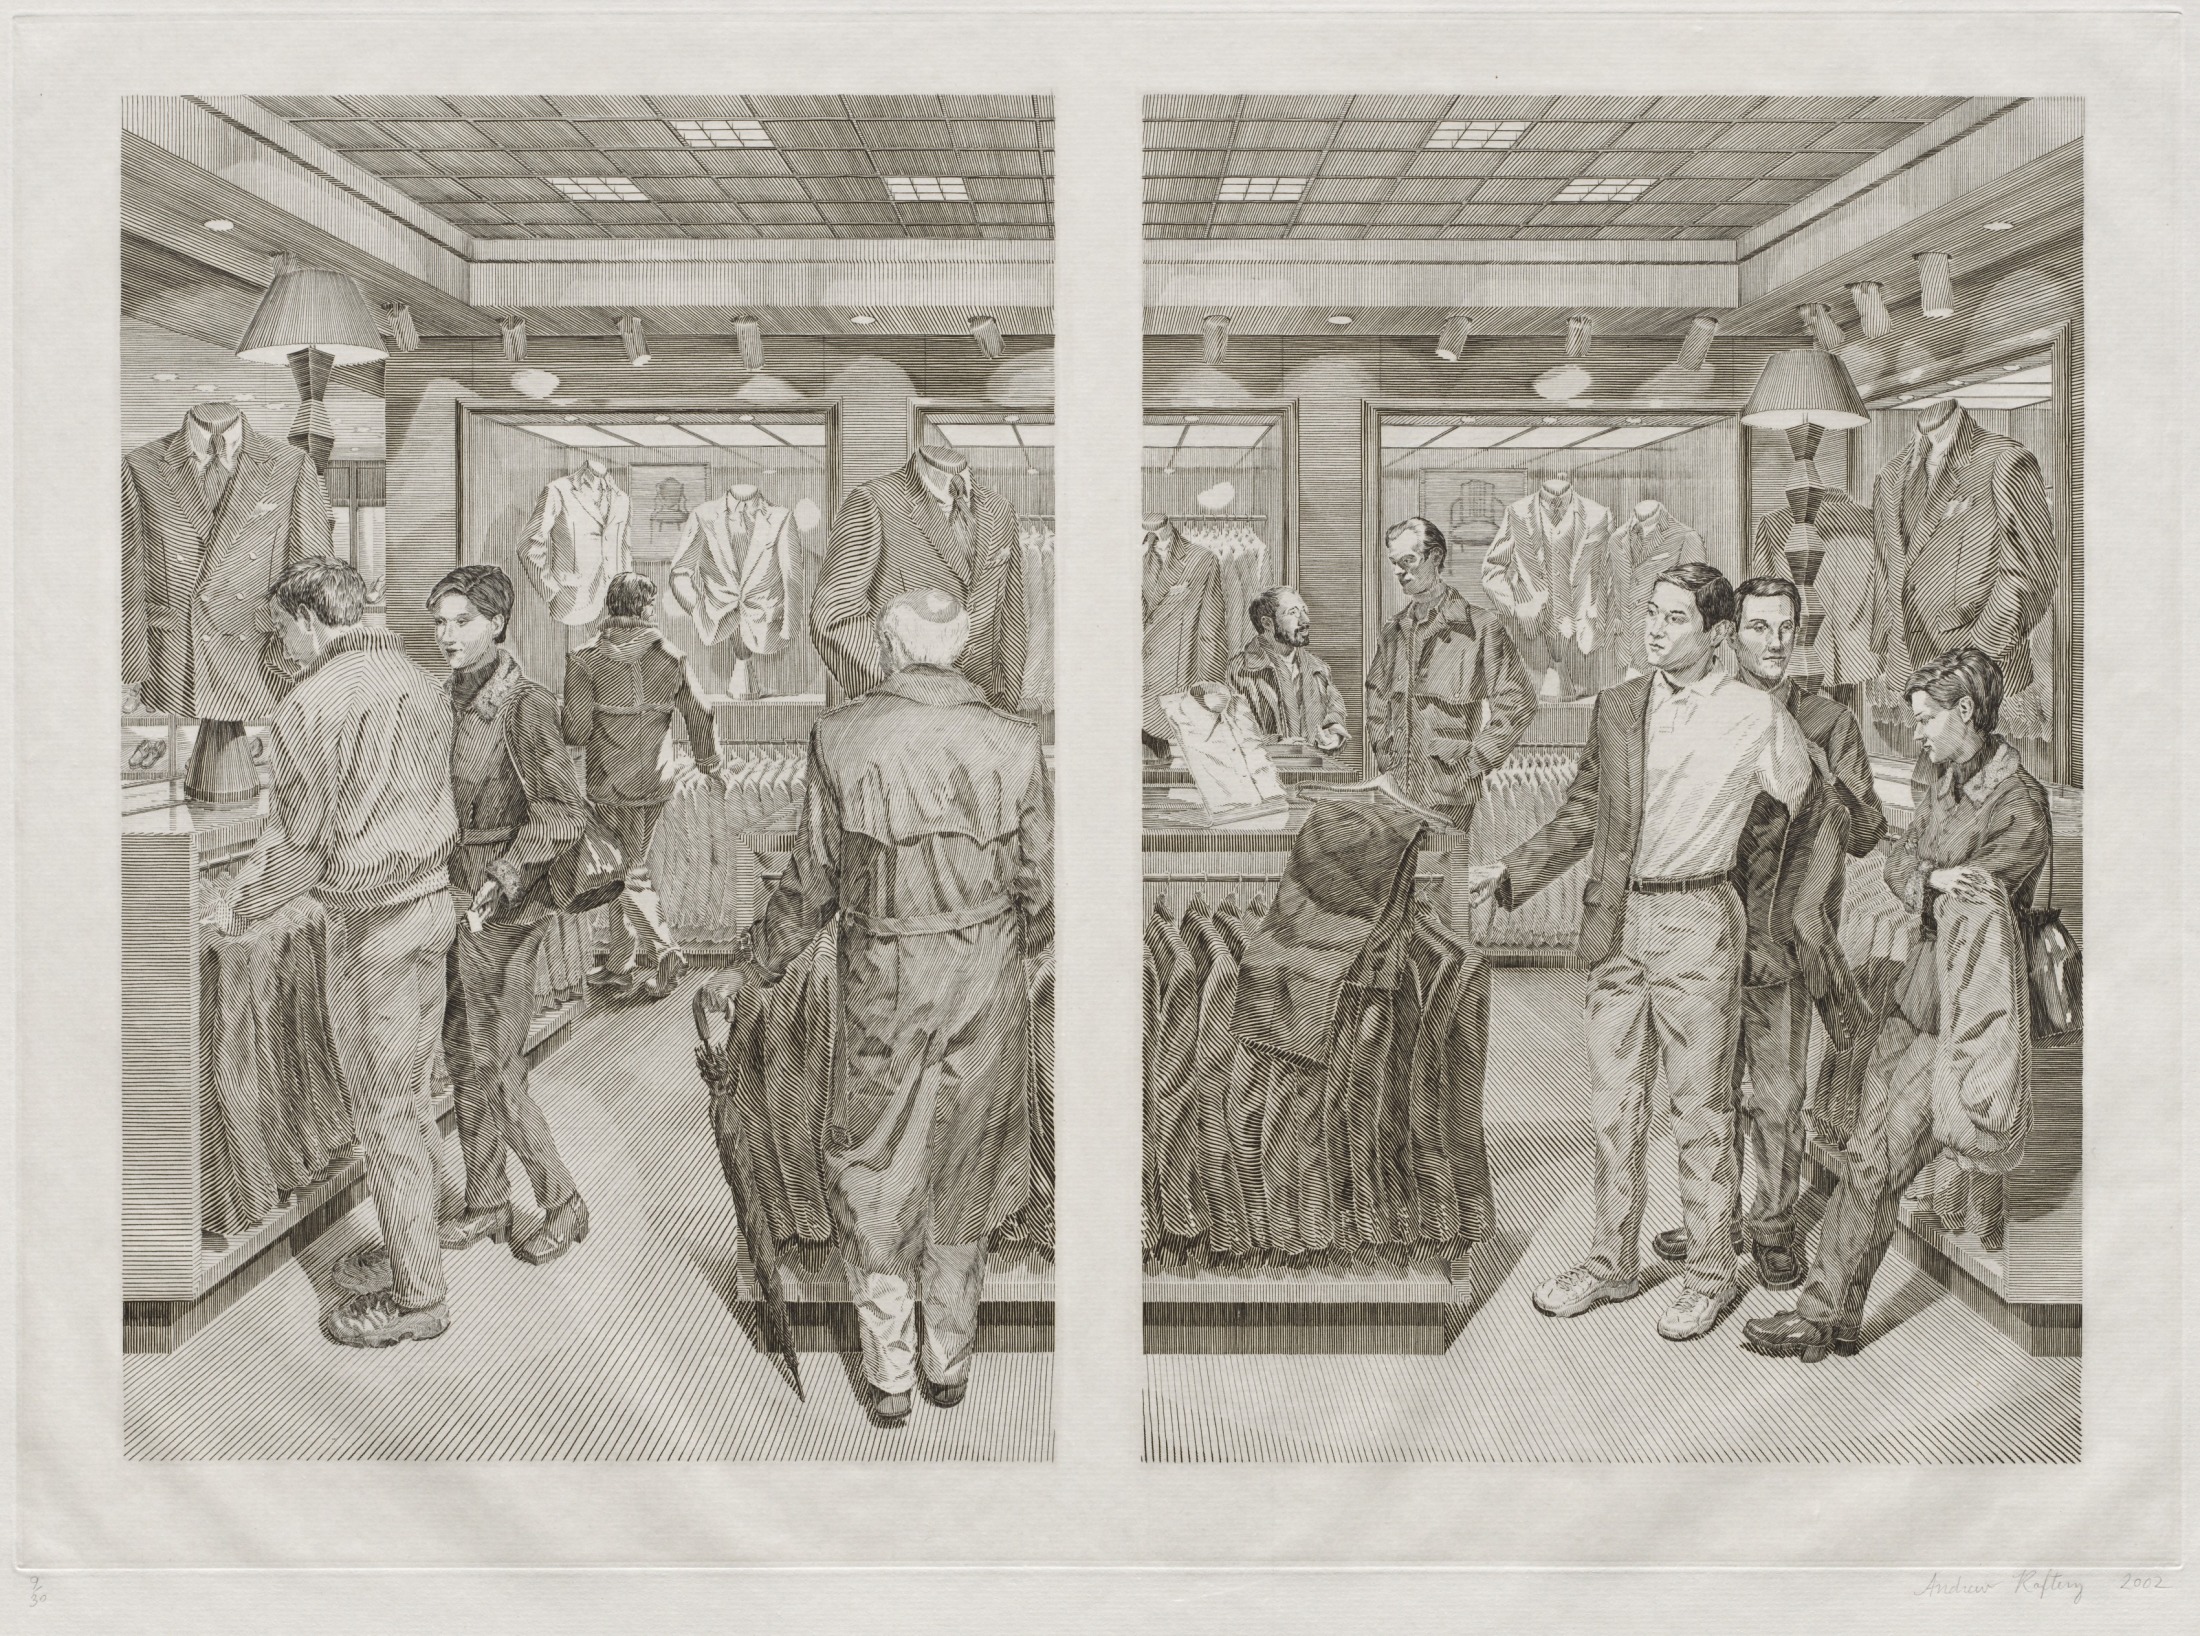 Suit Shopping: An Engraved Narrative, 2000-2002. Andrew Raftery (American, b. 1962). Engraving; 37.8 x 52.8 cm. Gift of friends in memory of Ann Bassett and Tom Johnson 2003.15. © Courtesy of the Artist and Mary Ryan Gallery, New York, NY.
